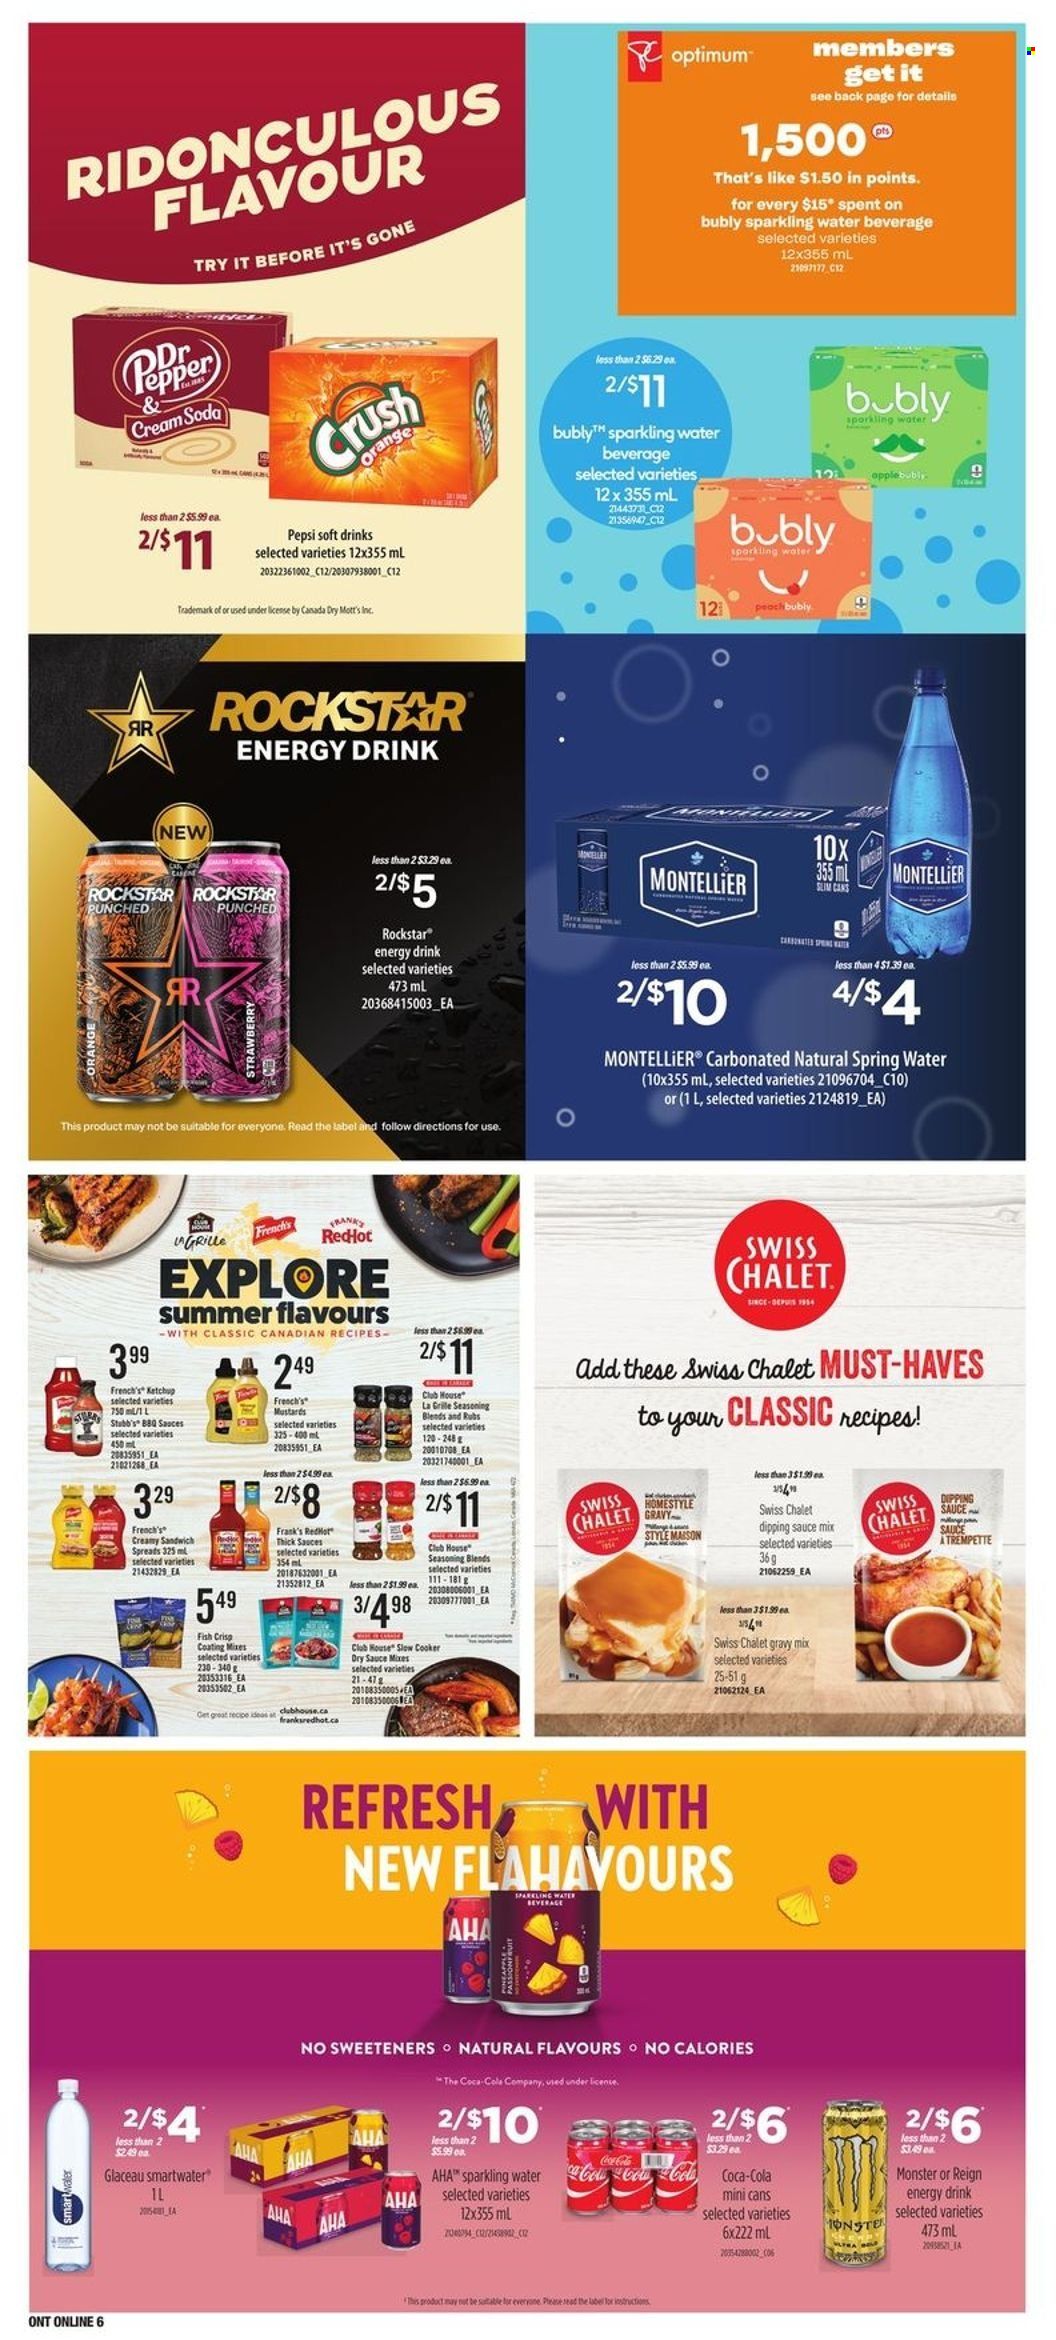 thumbnail - Loblaws Flyer - May 19, 2022 - May 25, 2022 - Sales products - Mott's, fish, sandwich, gravy mix, pepper, spice, Canada Dry, Coca-Cola, Pepsi, energy drink, Monster, soft drink, Rockstar, spring water, sparkling water, Smartwater, Optimum, ketchup, oranges. Page 13.